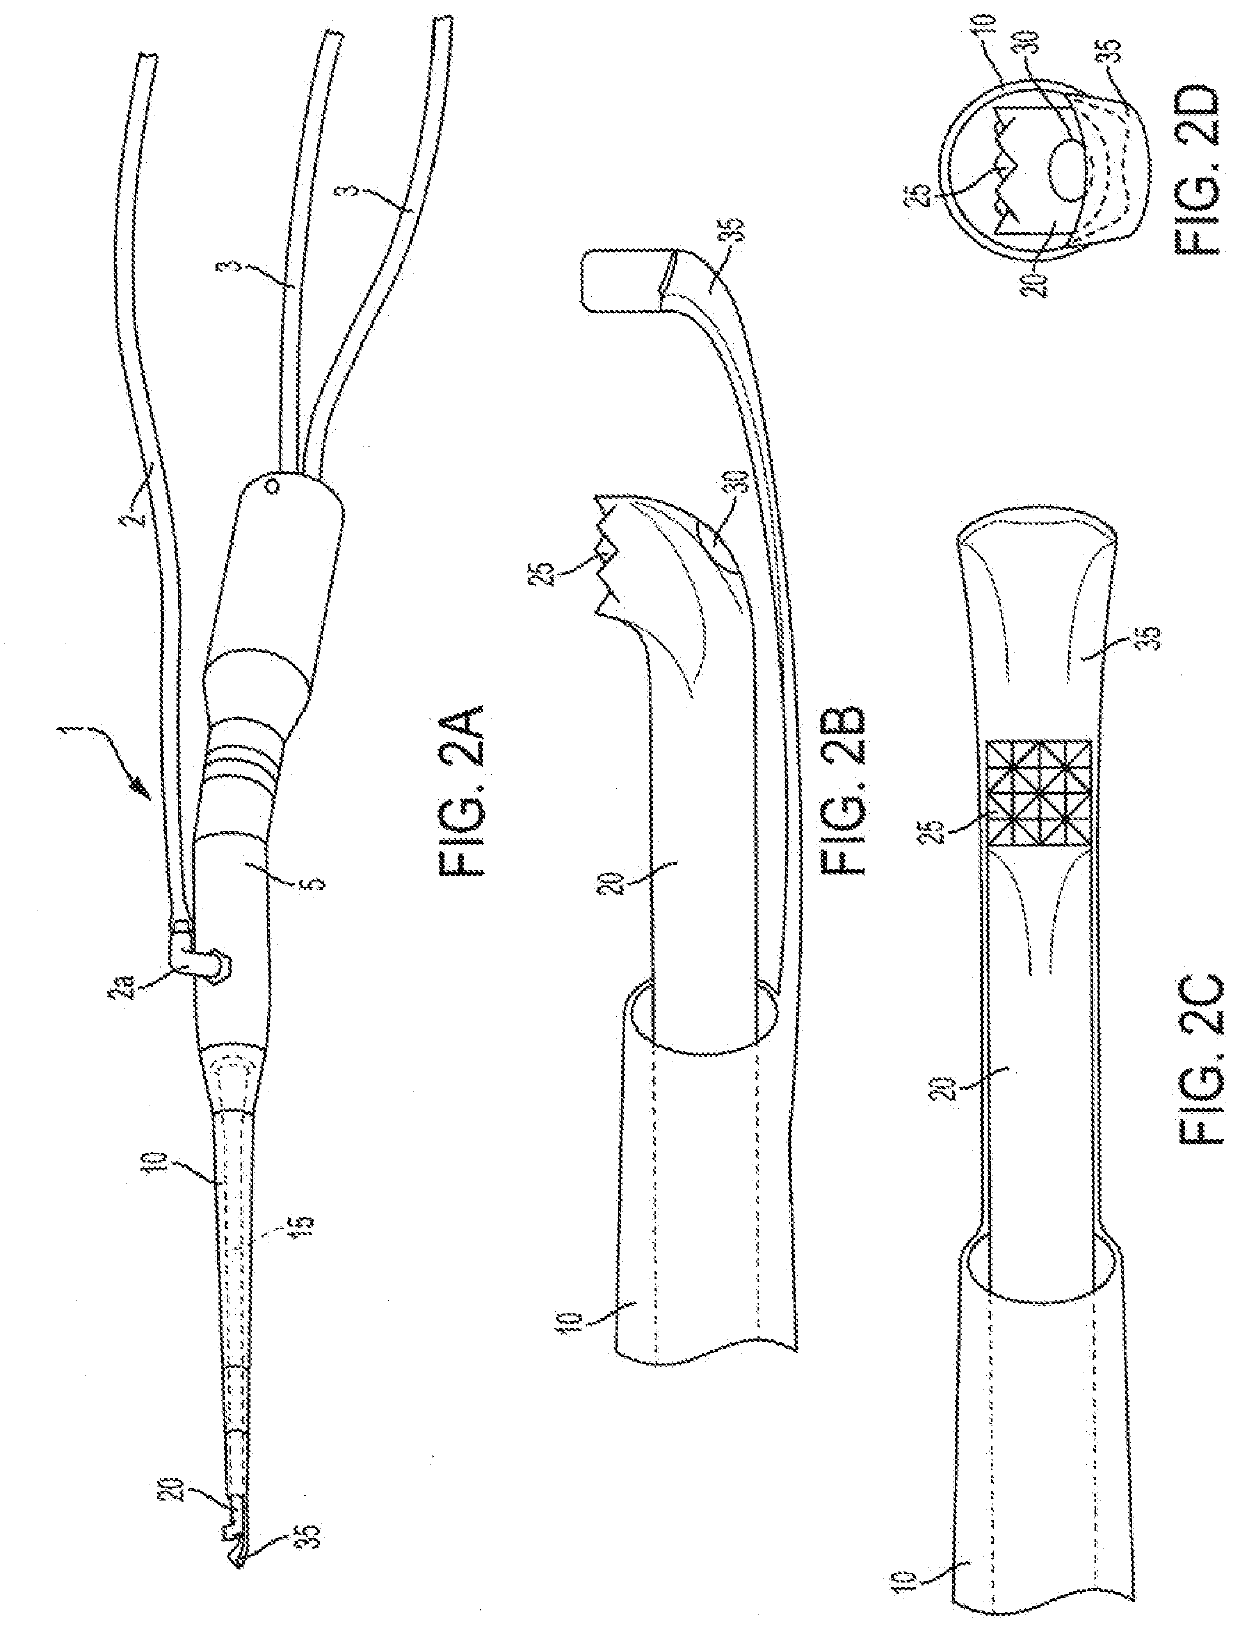 Modified ultrasound aspirator for use in and around vital structures of a body